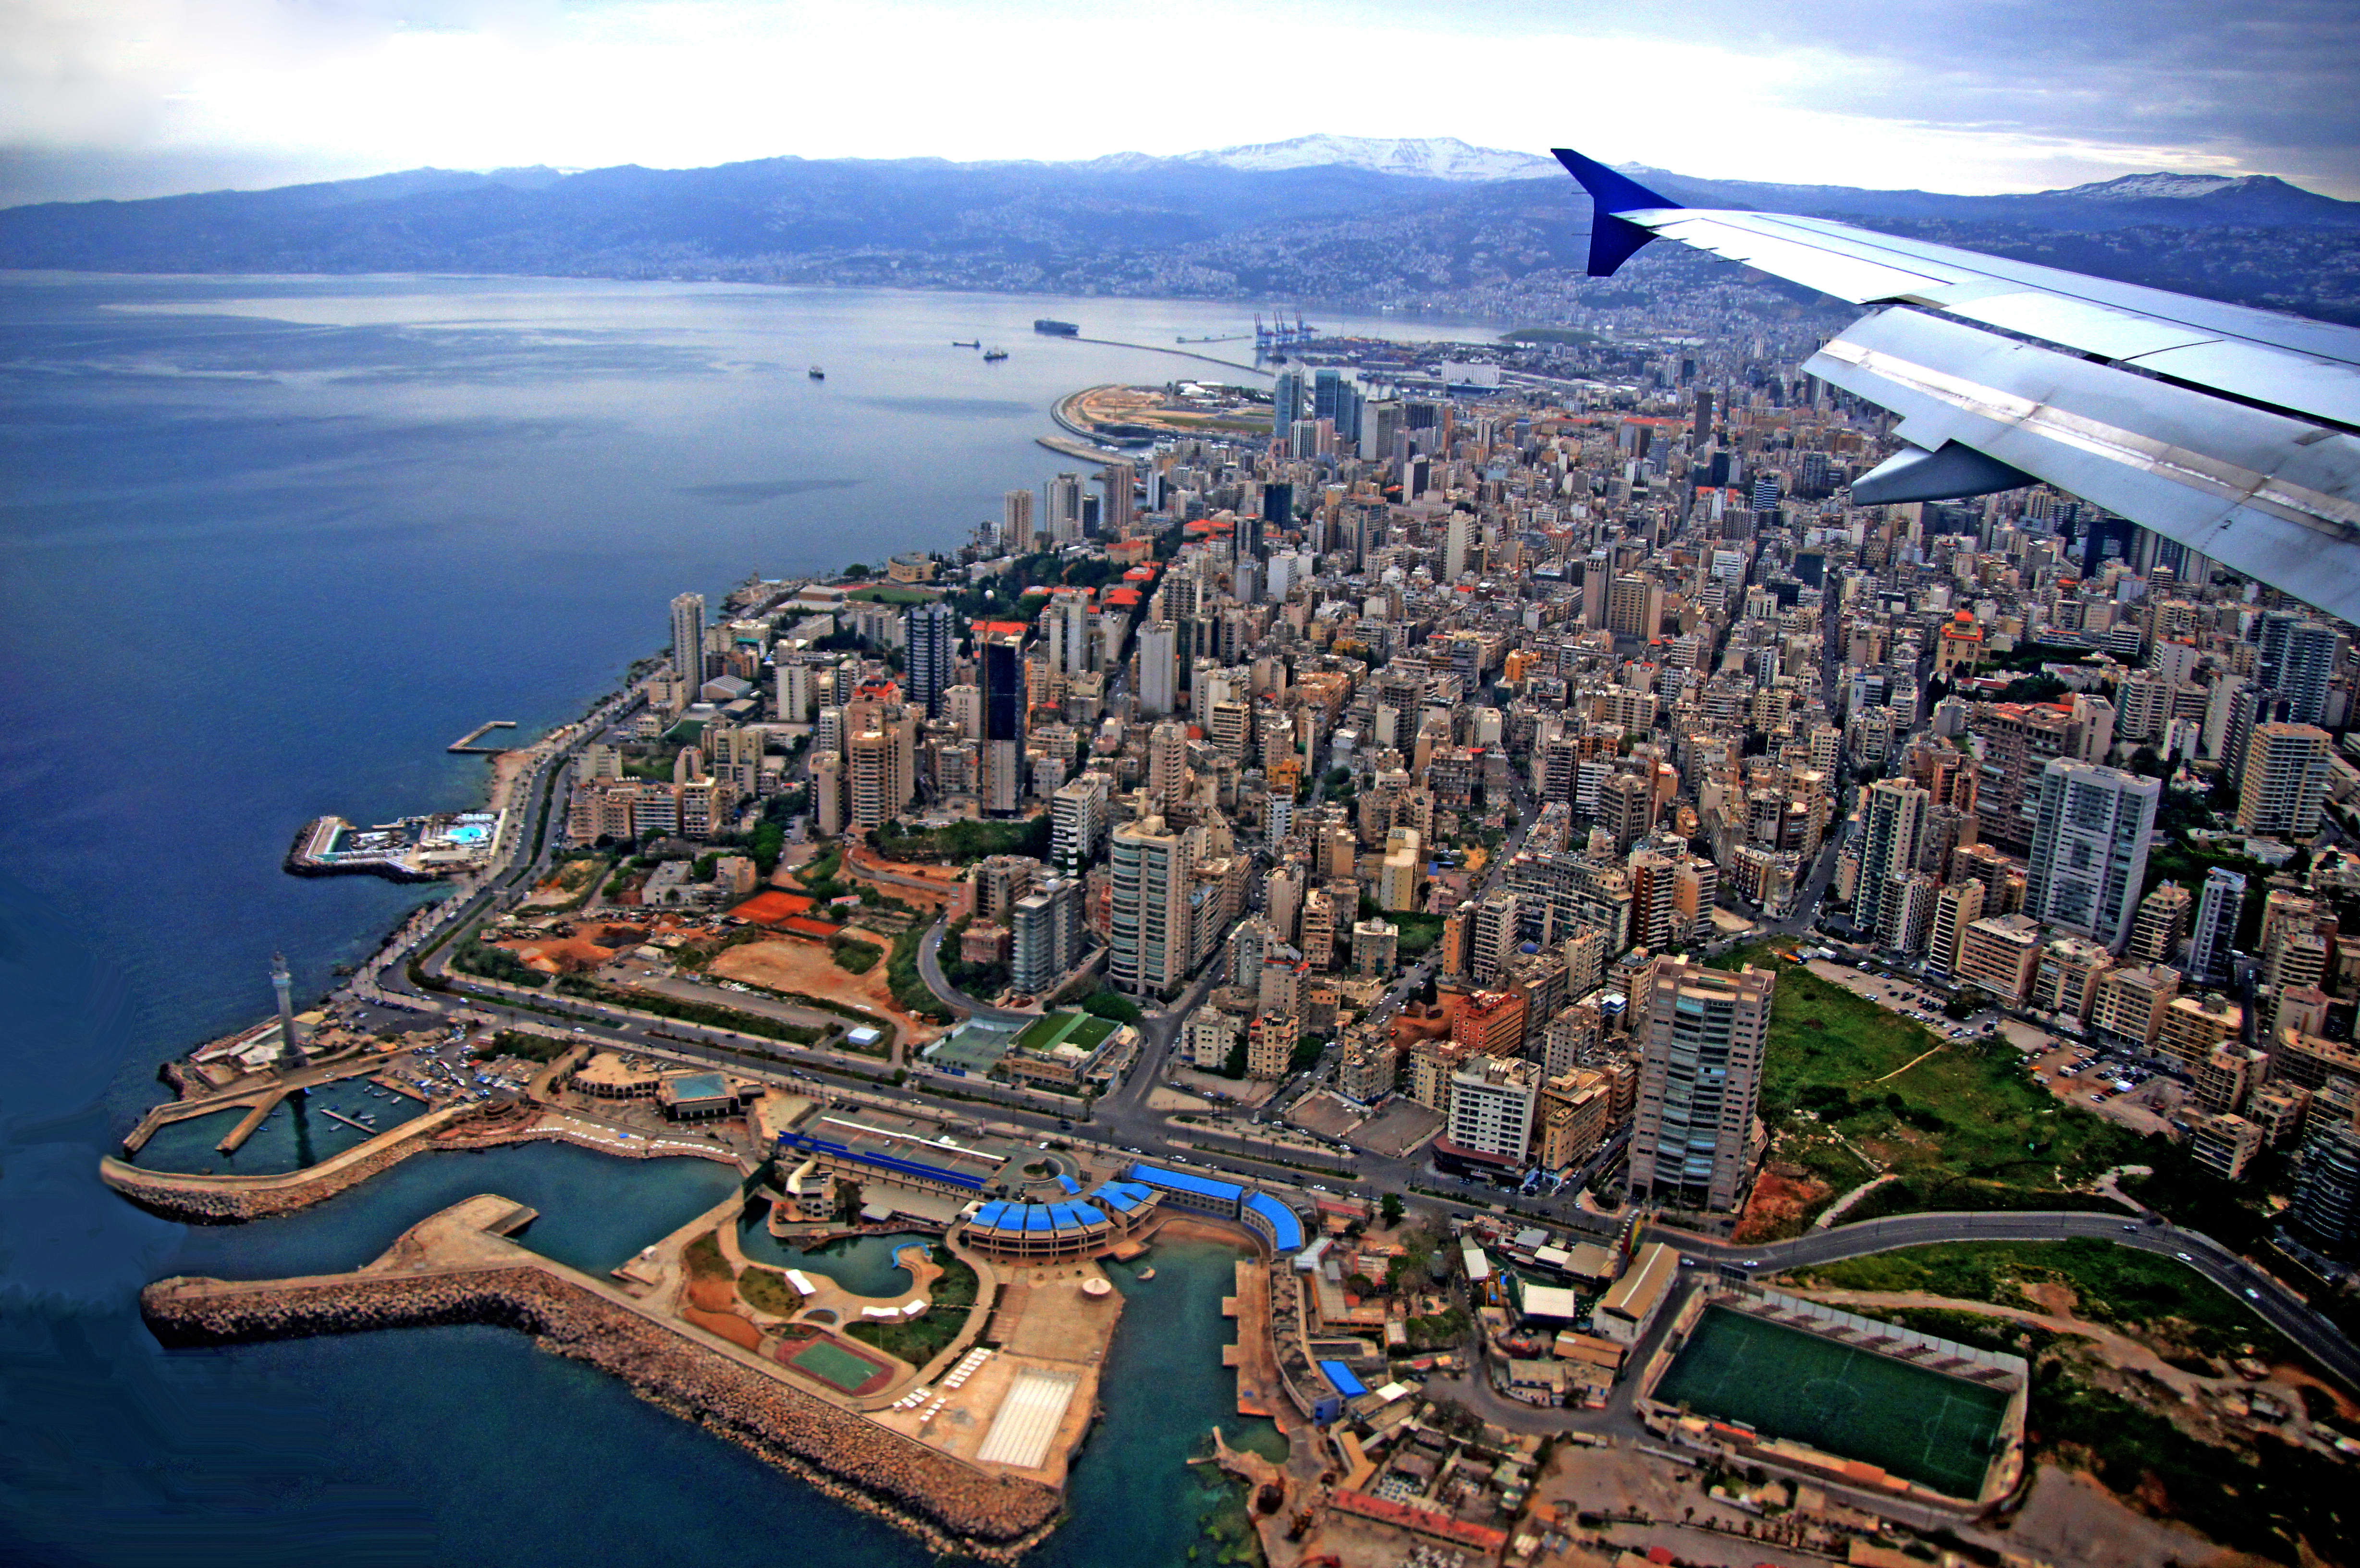 Lebanon is in two different time zones as the government disagreed about daylight saving time